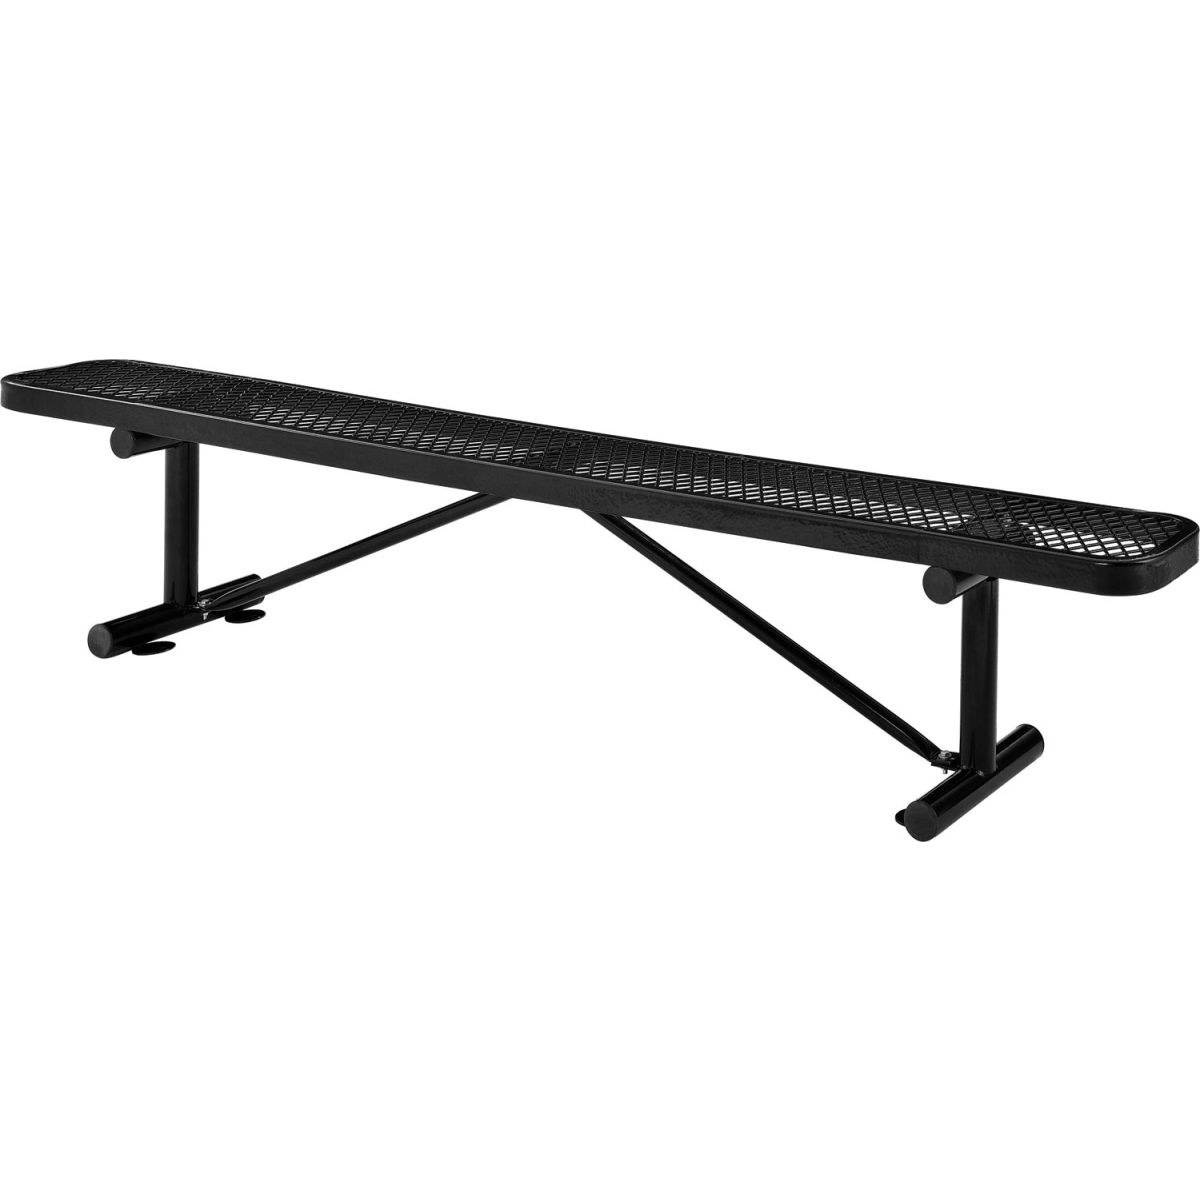 Picture of Global Industrial 3321529 8 ft. Outdoor Steel & Expanded Metal Flat Bench - Black